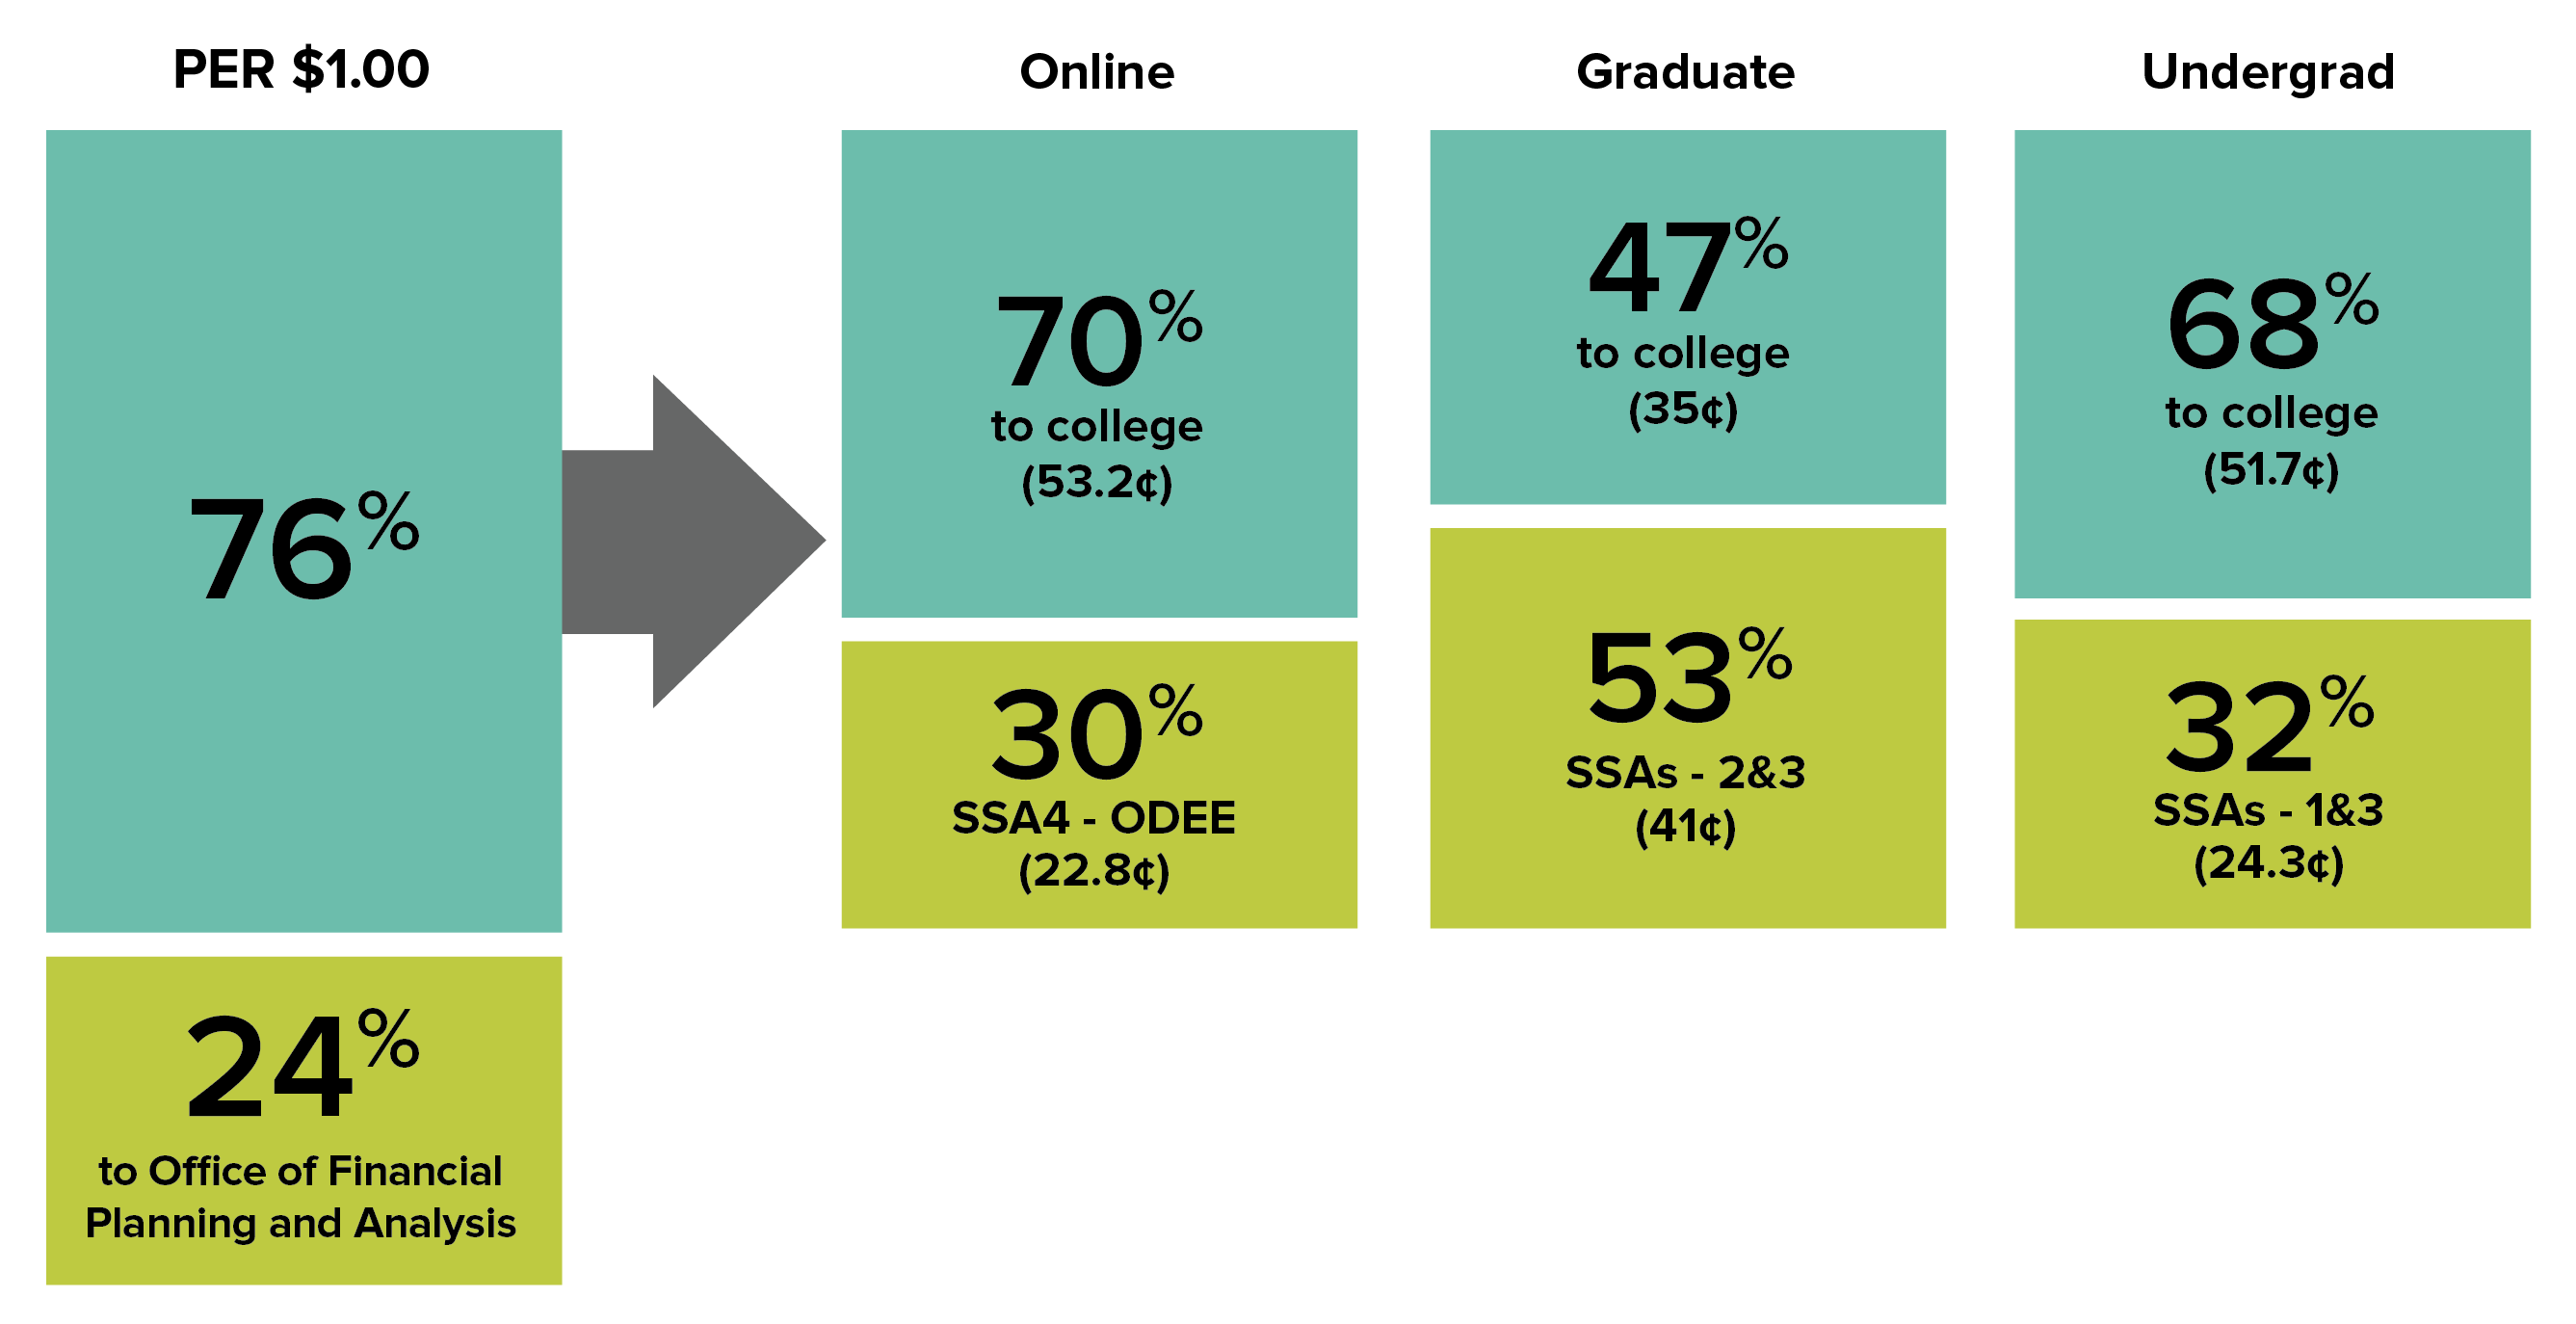 Bar graph comparing percentage of each tuition dollar that goes to colleges for online students compared to graduate and undergraduate students